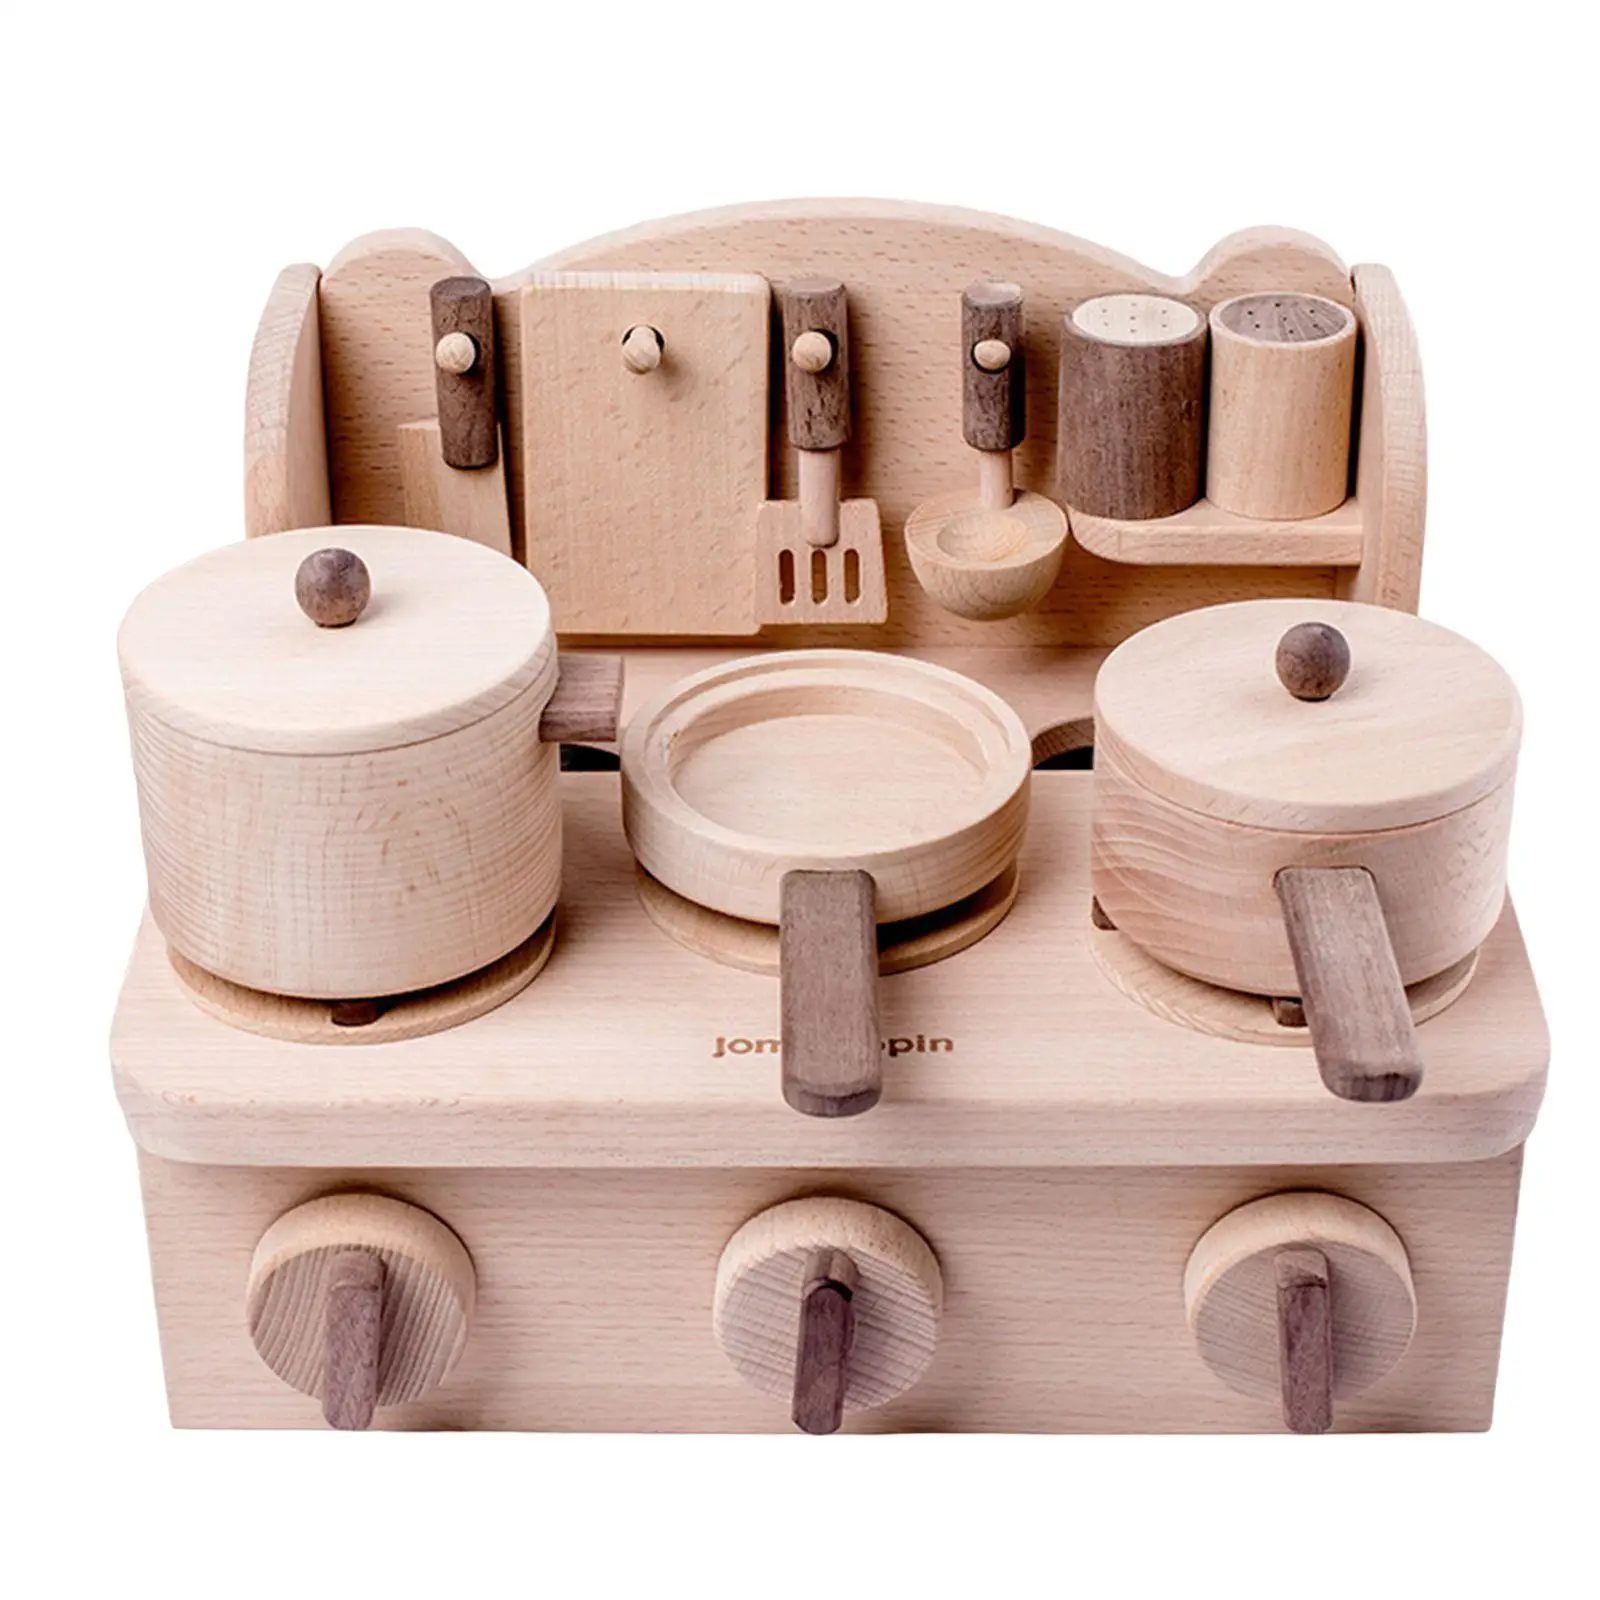 Wood Pretend Kitchen Playset Mini Kitchen Realistic Setup Cookware Accessories Gift Kitchen Play Toy Set for Toddlers Girls Boys